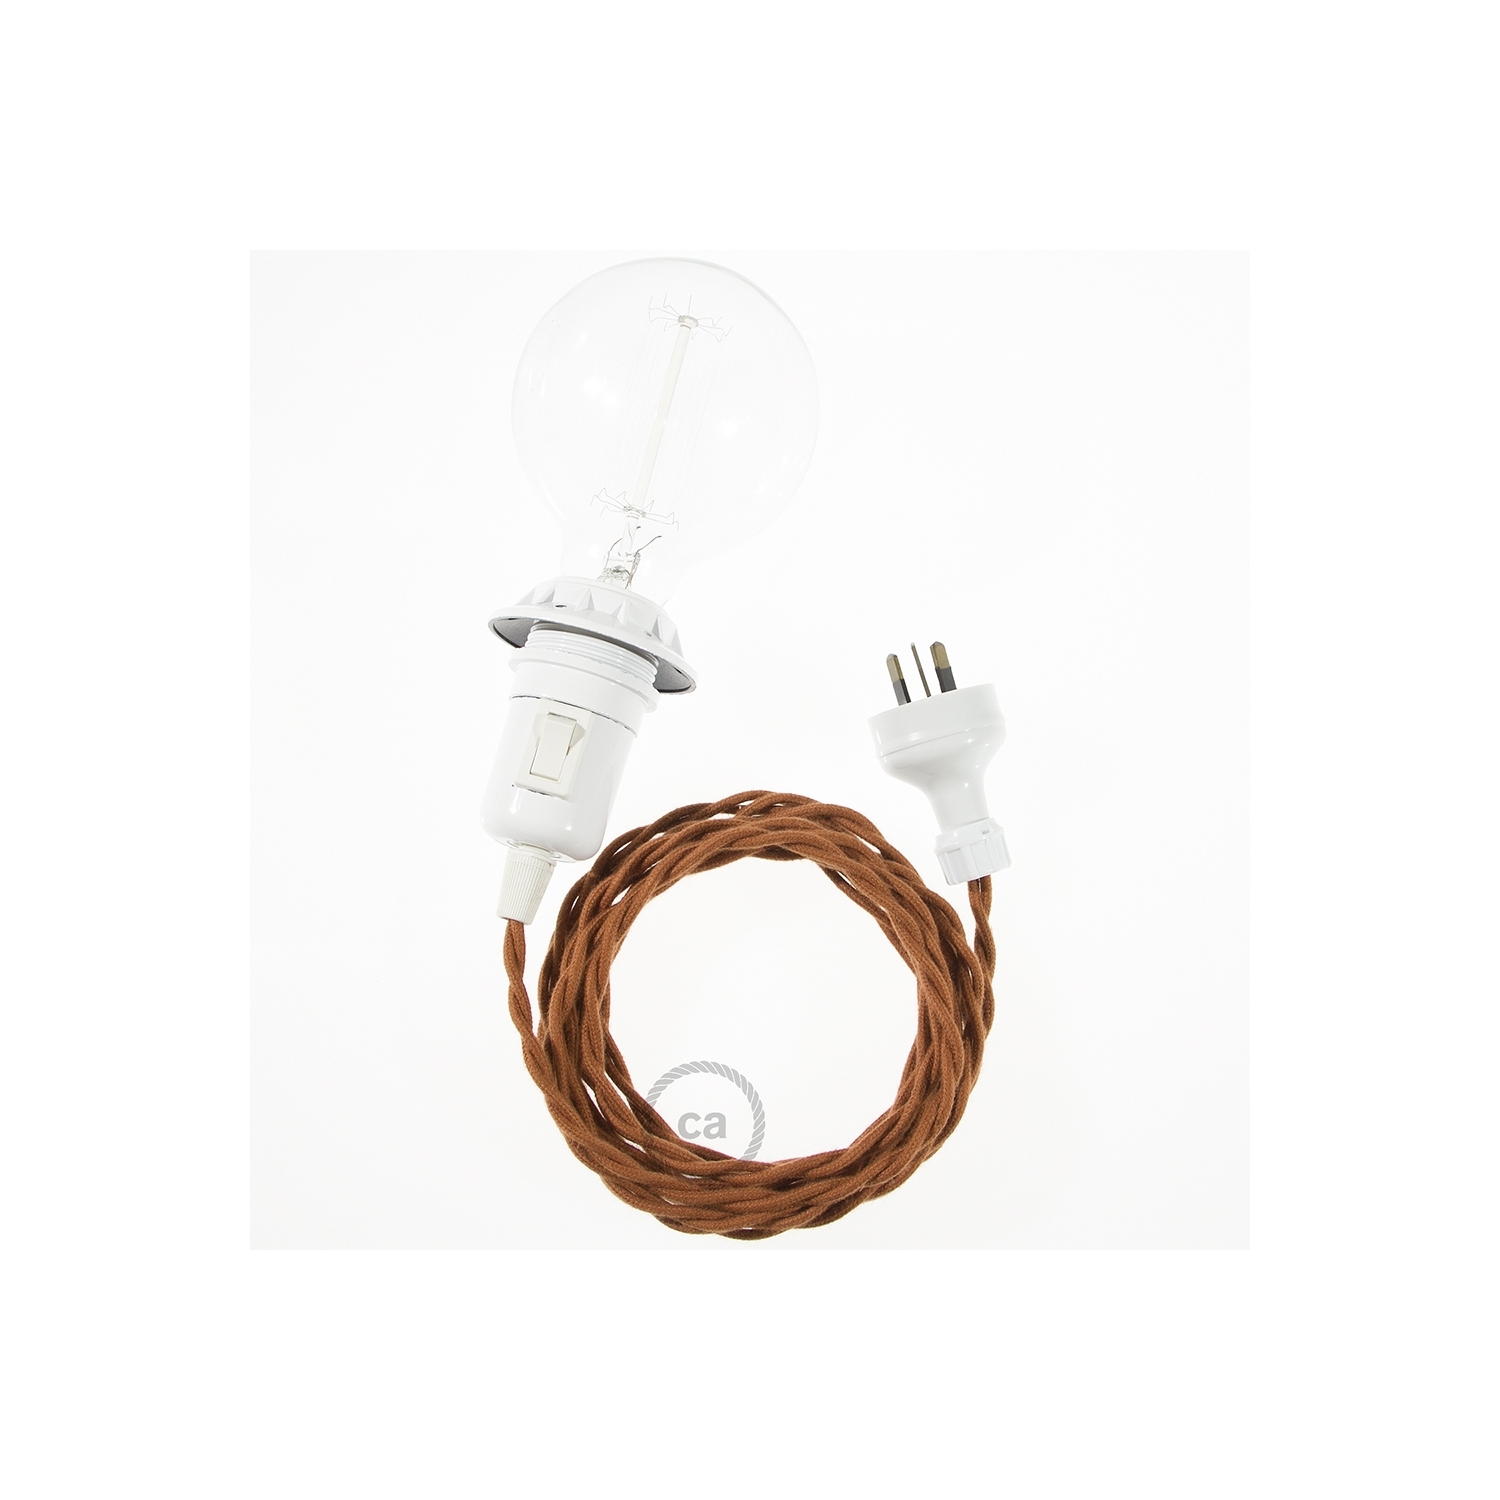 Create your TC23 Deer Cotton Snake for lampshade and bring the light wherever you want.